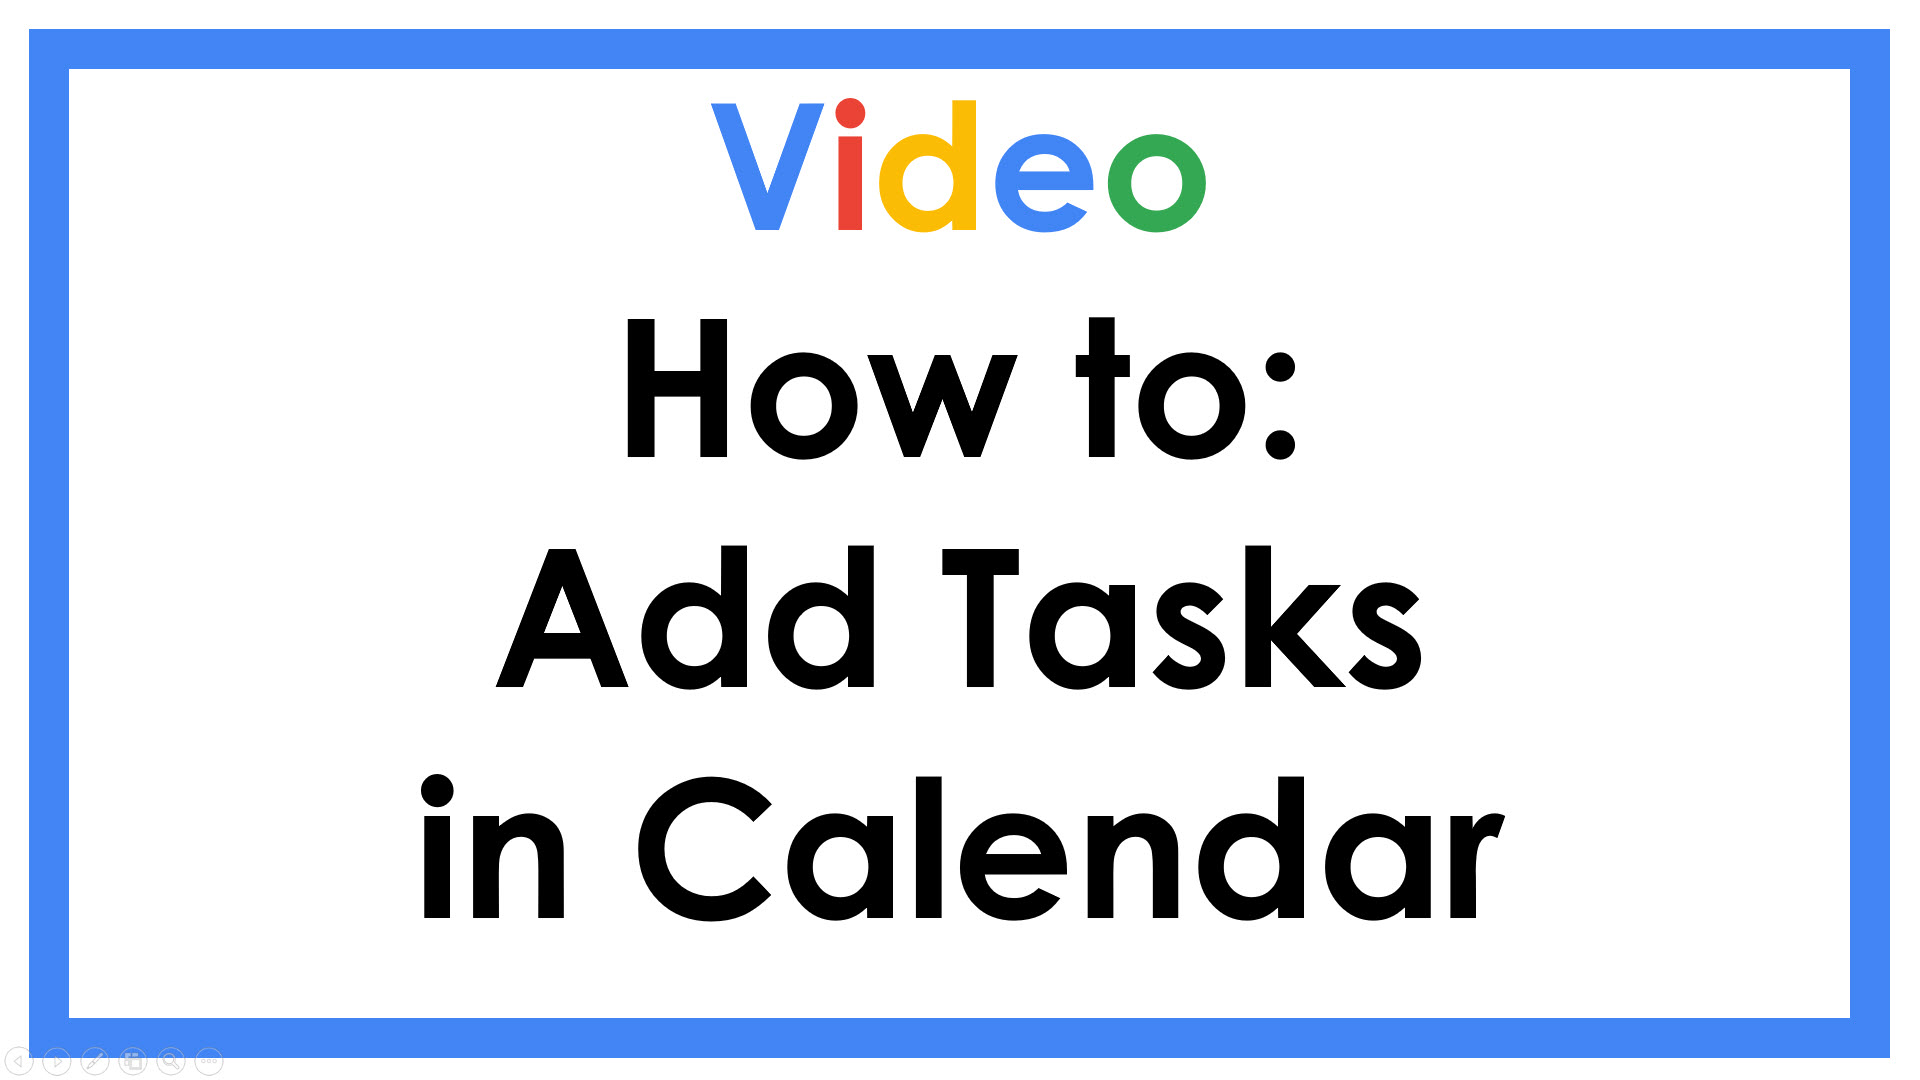 Video How To: Add Tasks in Calendar